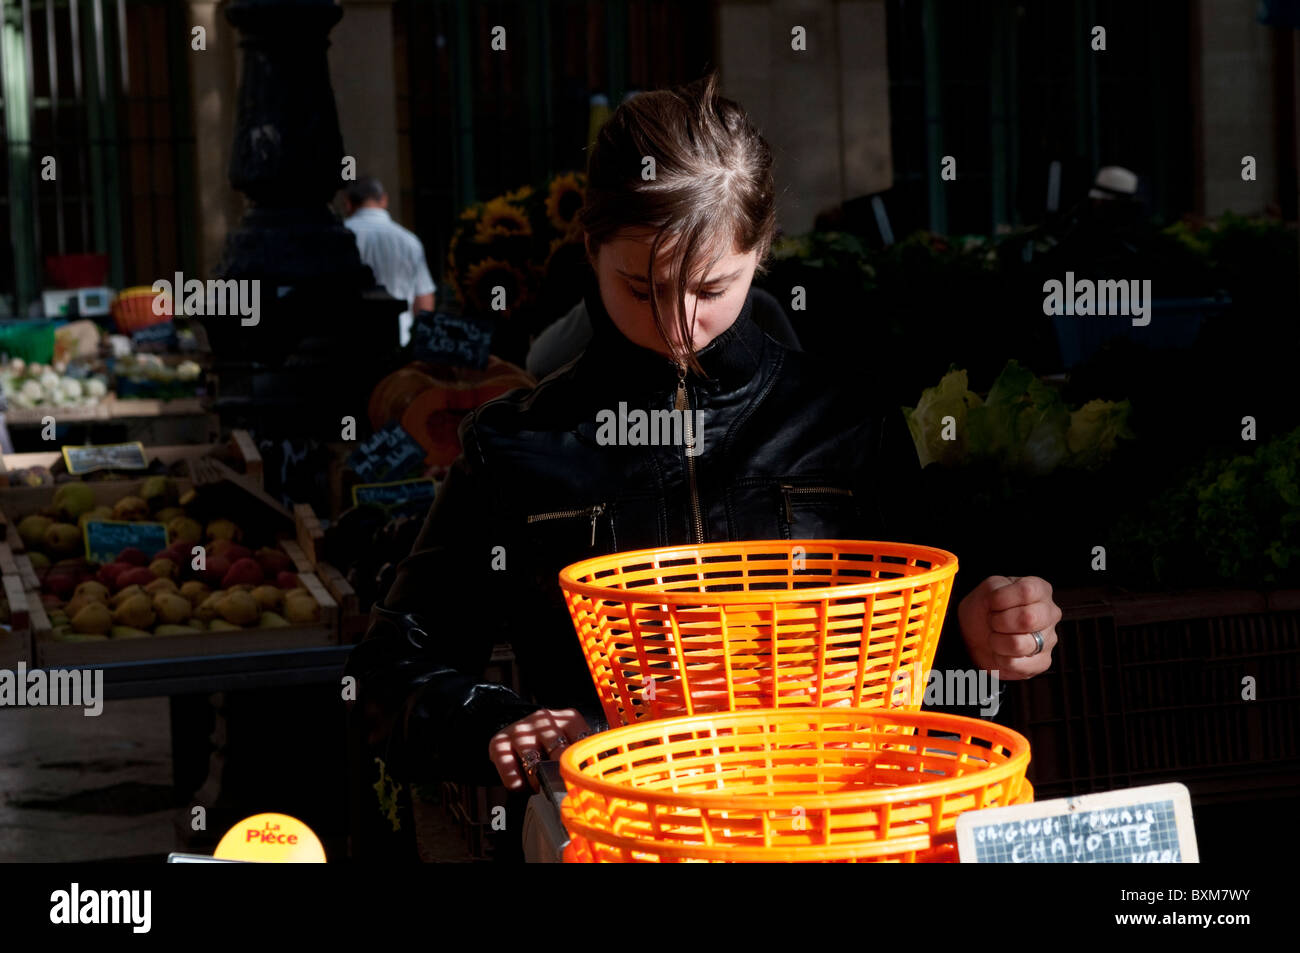 Girl with orange baskets, Market at the Town Hall square, Aix En Provence, France Stock Photo